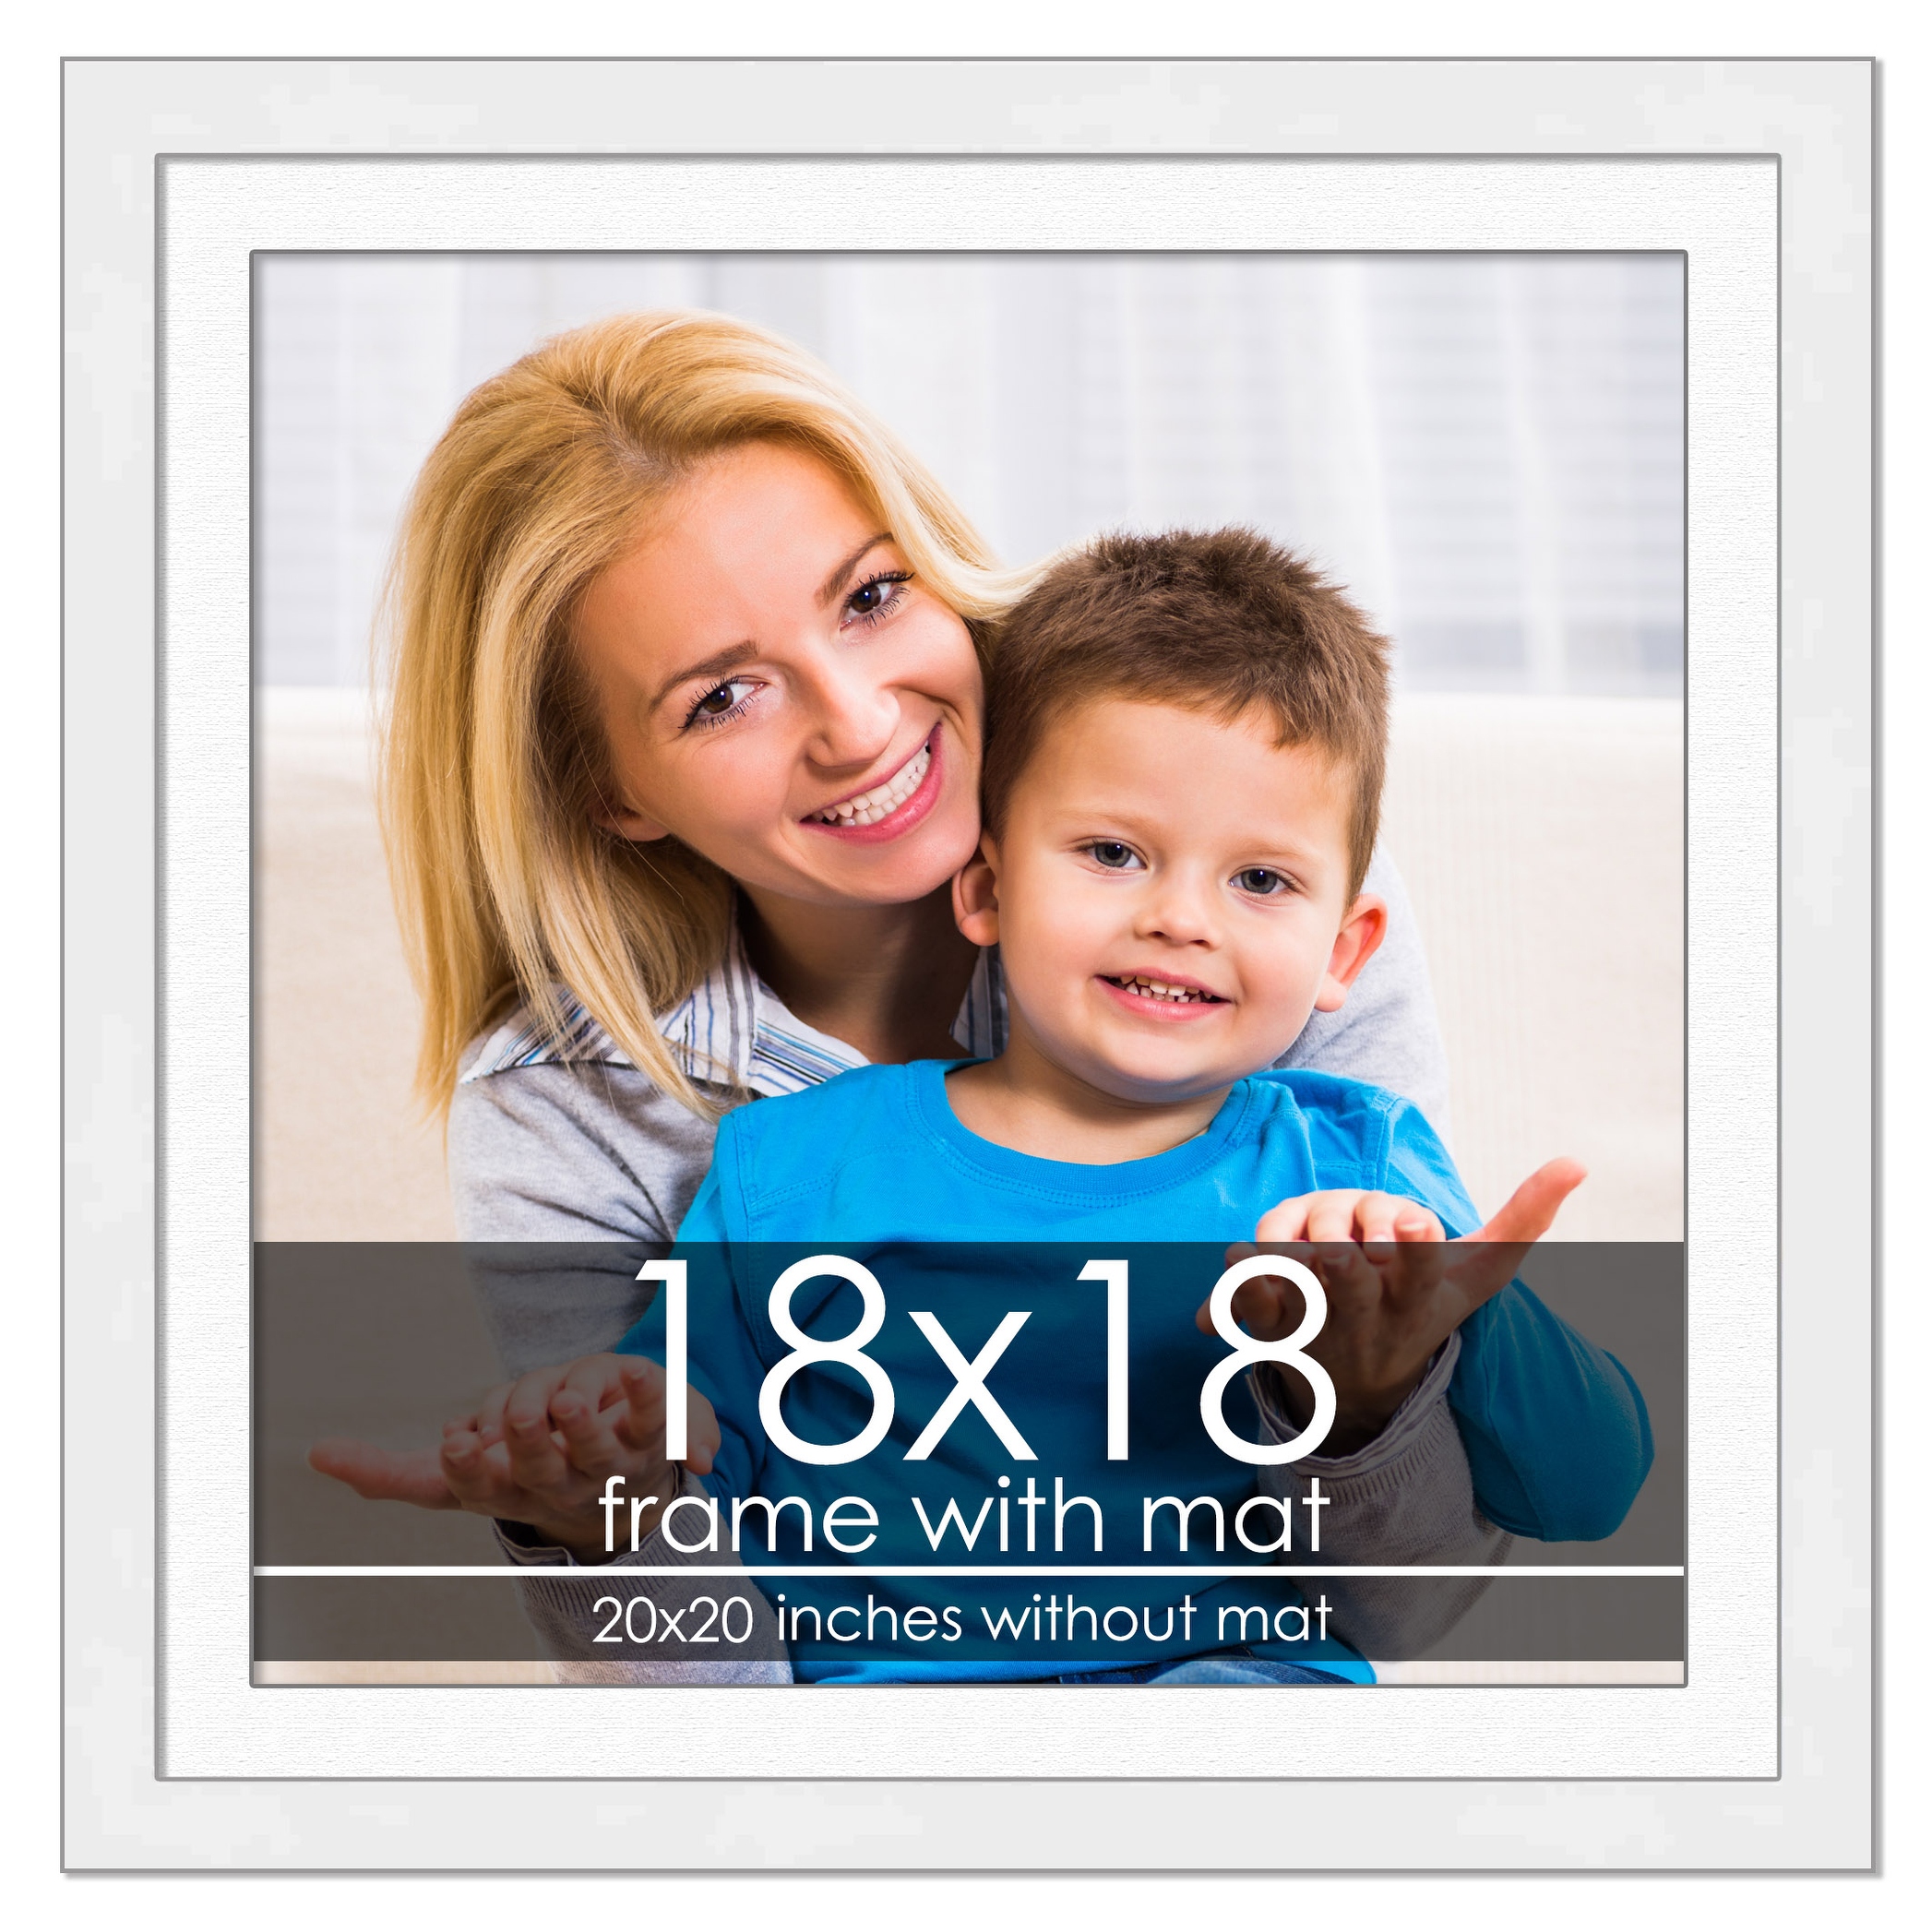 18x18 Frame with Mat - White 20x20 Frame Wood Made to Display Print or Poster Measuring 18 x 18 Inches with White Photo Mat